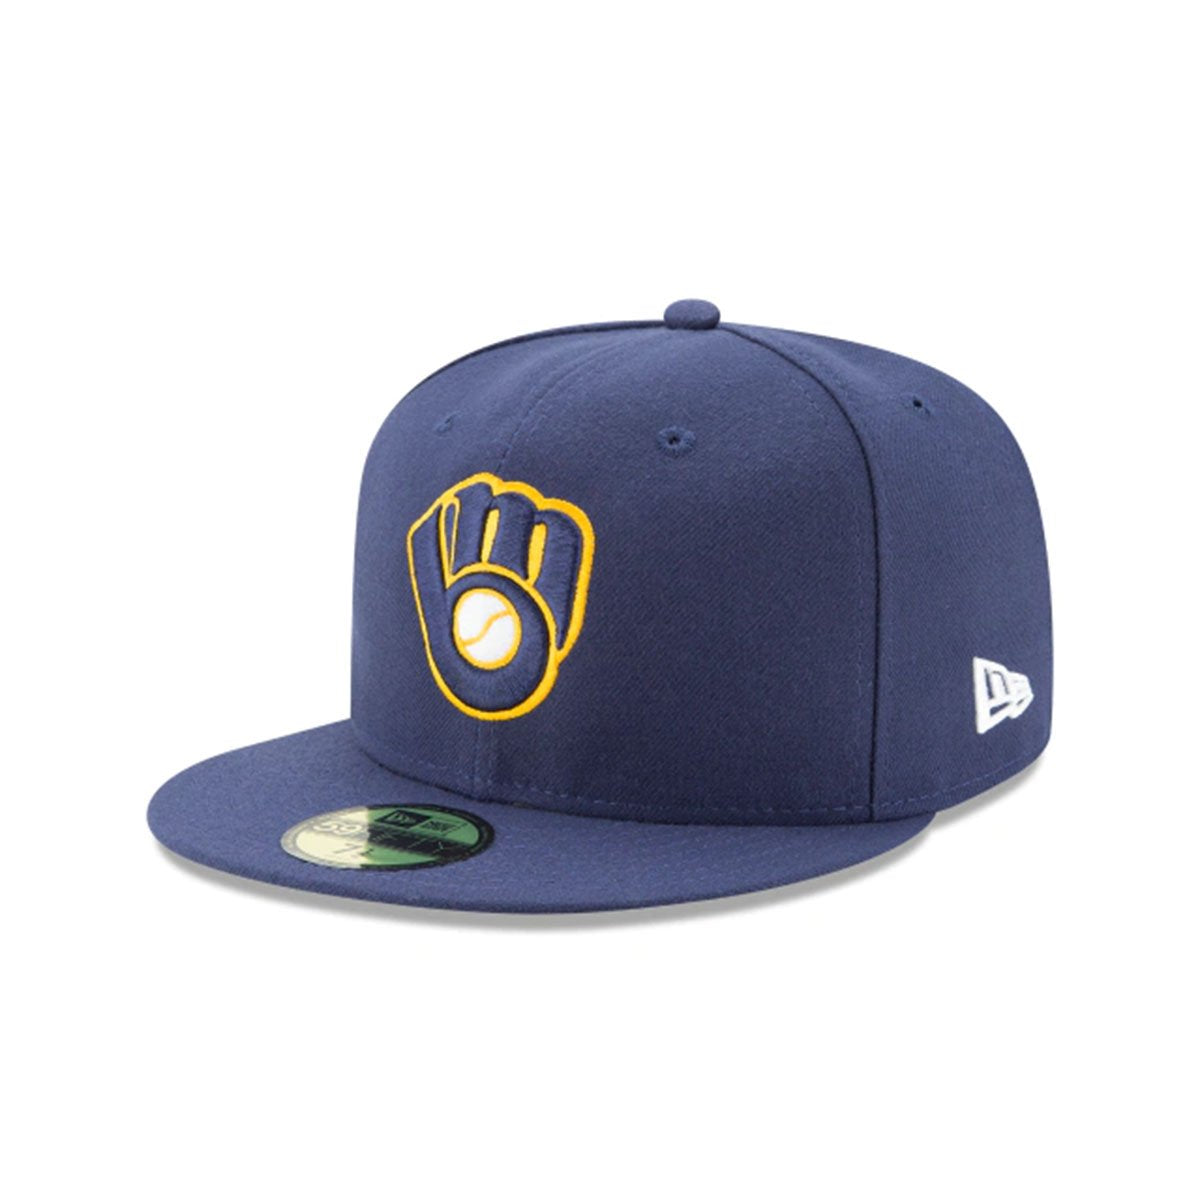 MILWAUKEE BREWERS 59FIFTY FITTED BLUE/YELLOW